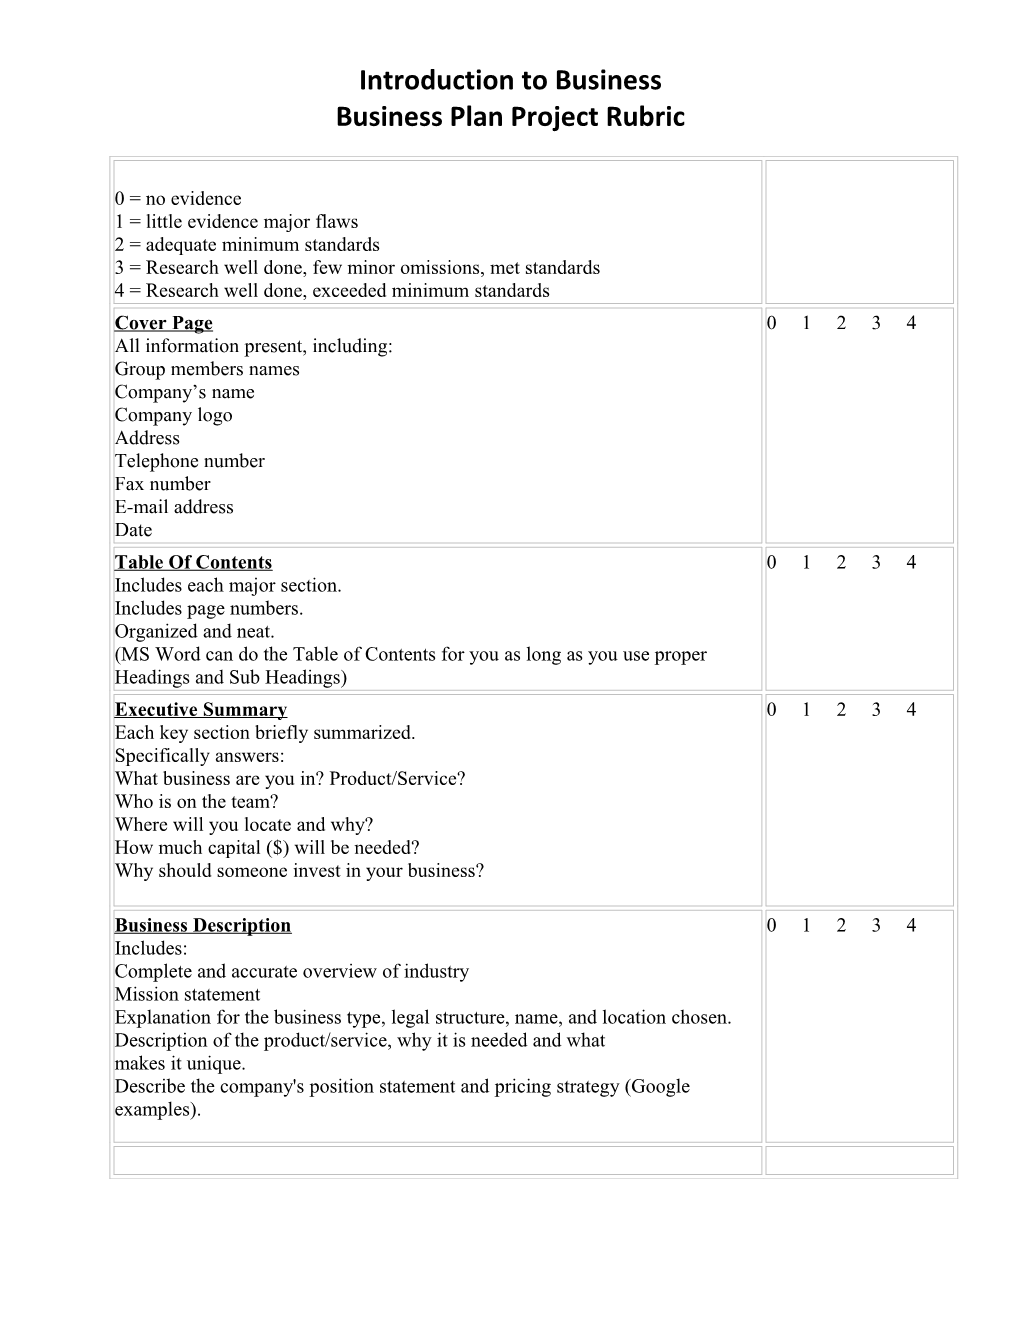 Business Plan Project Rubric